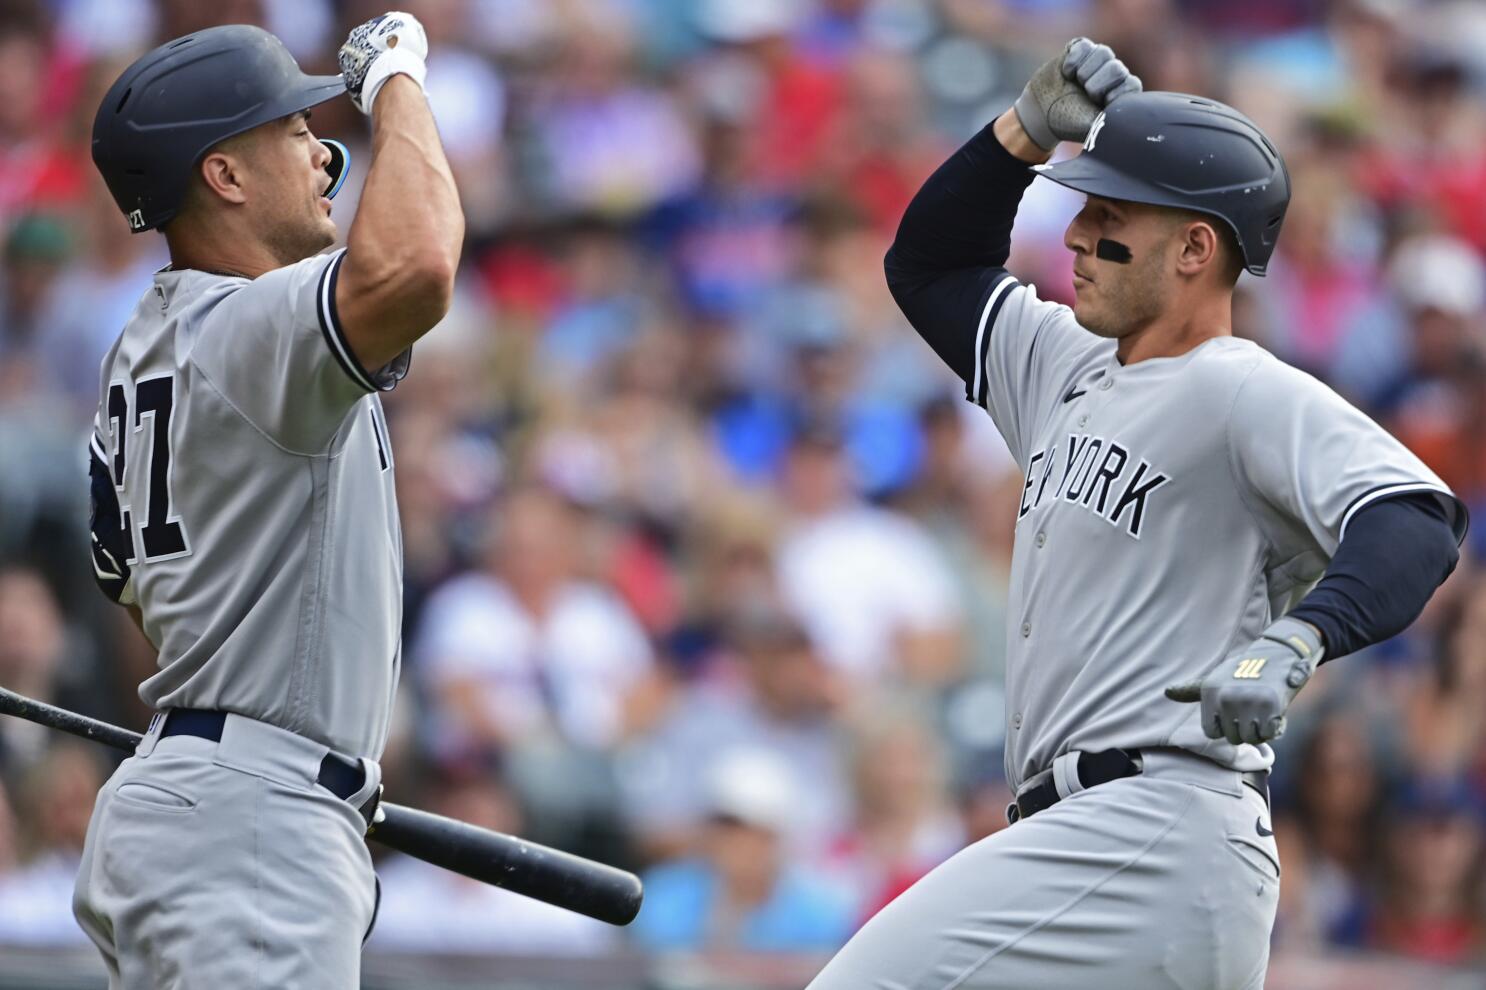 New York Yankees' Giancarlo Stanton Continues to Lead Baseball in